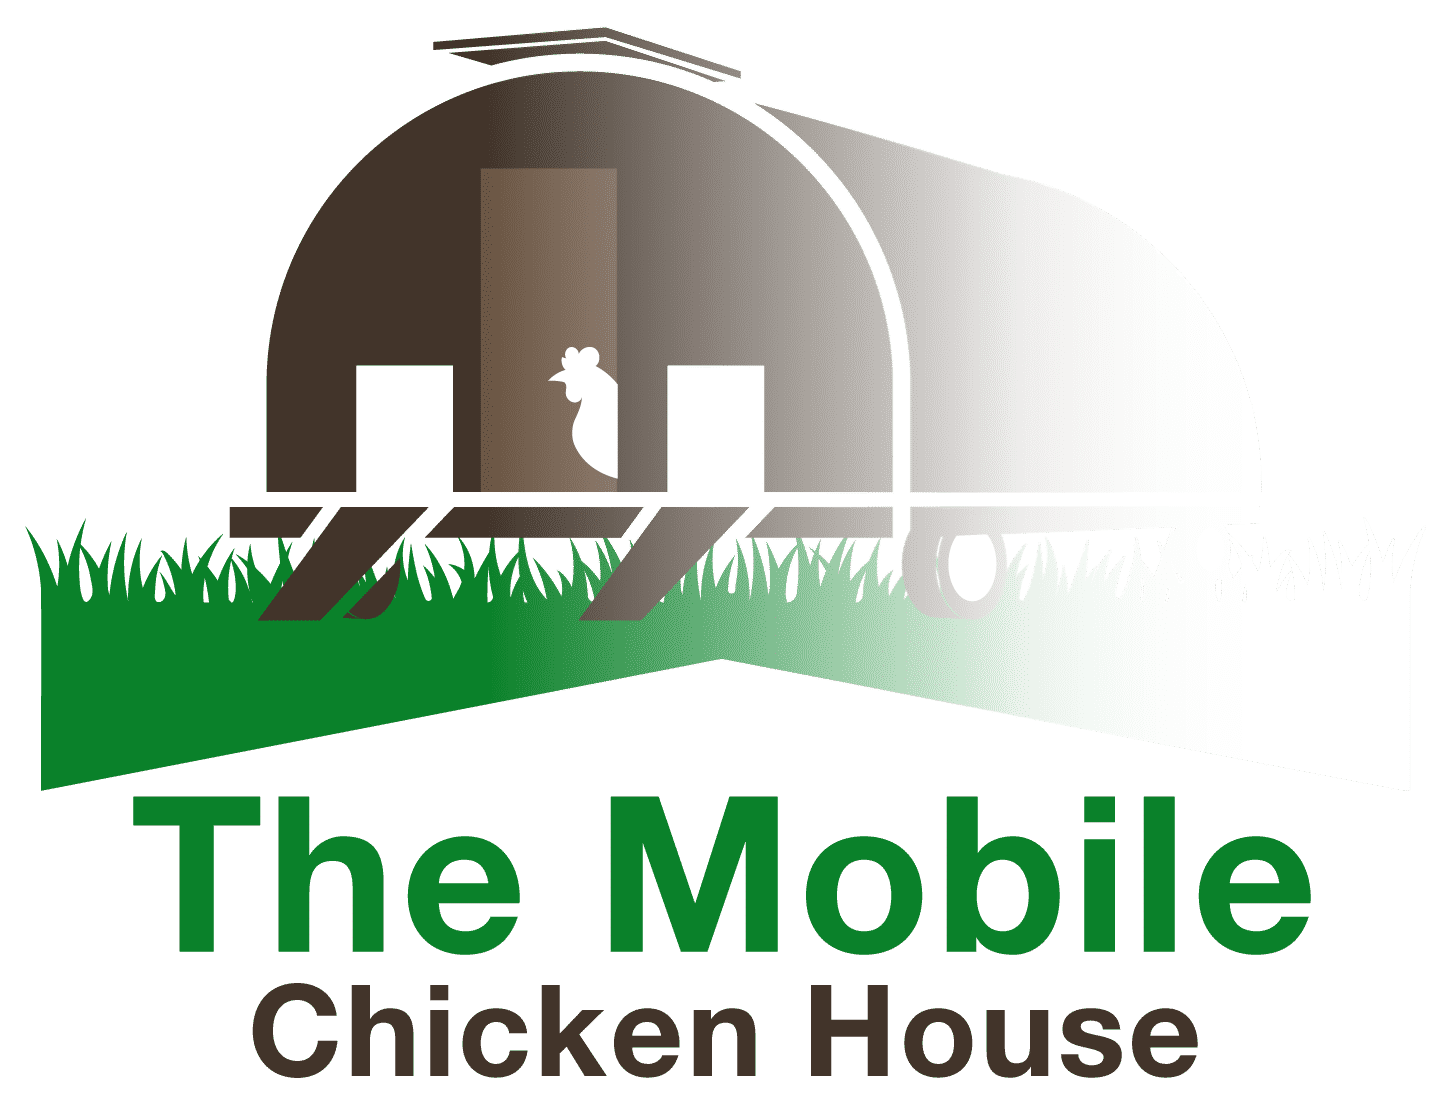 Logo-The-Mobile-Chicken-House-01-2